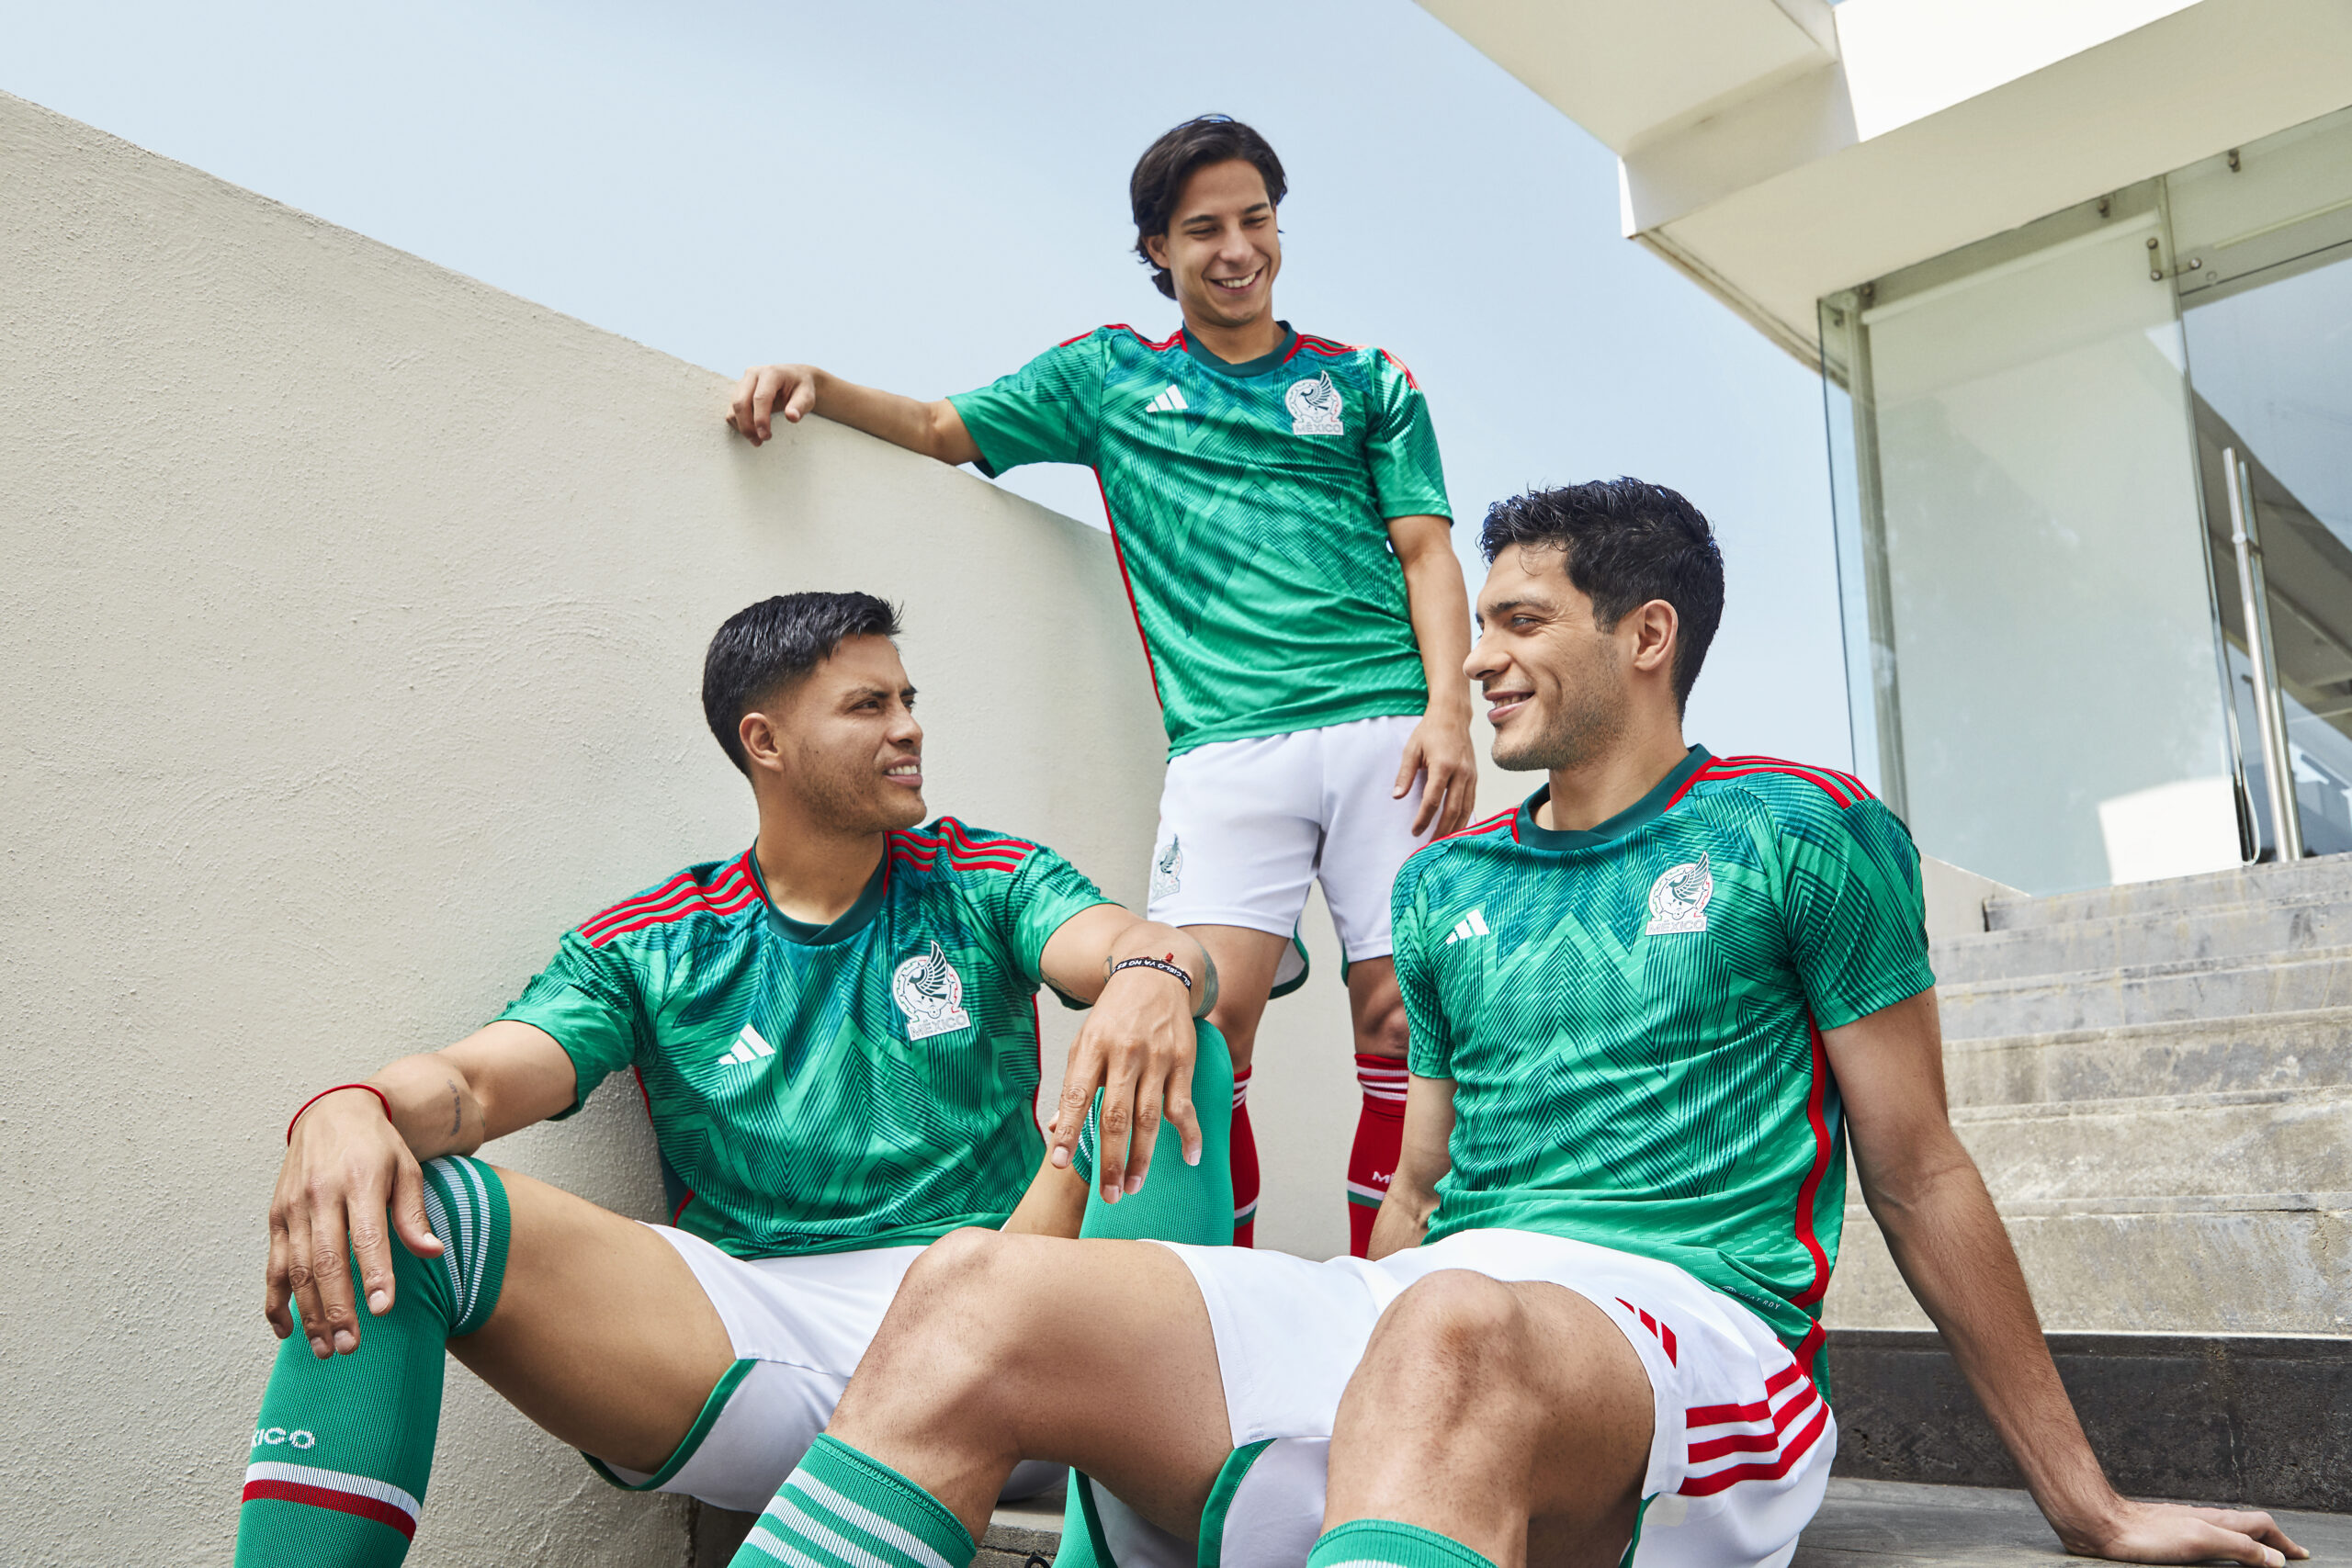 mexico jersey for world cup 2022